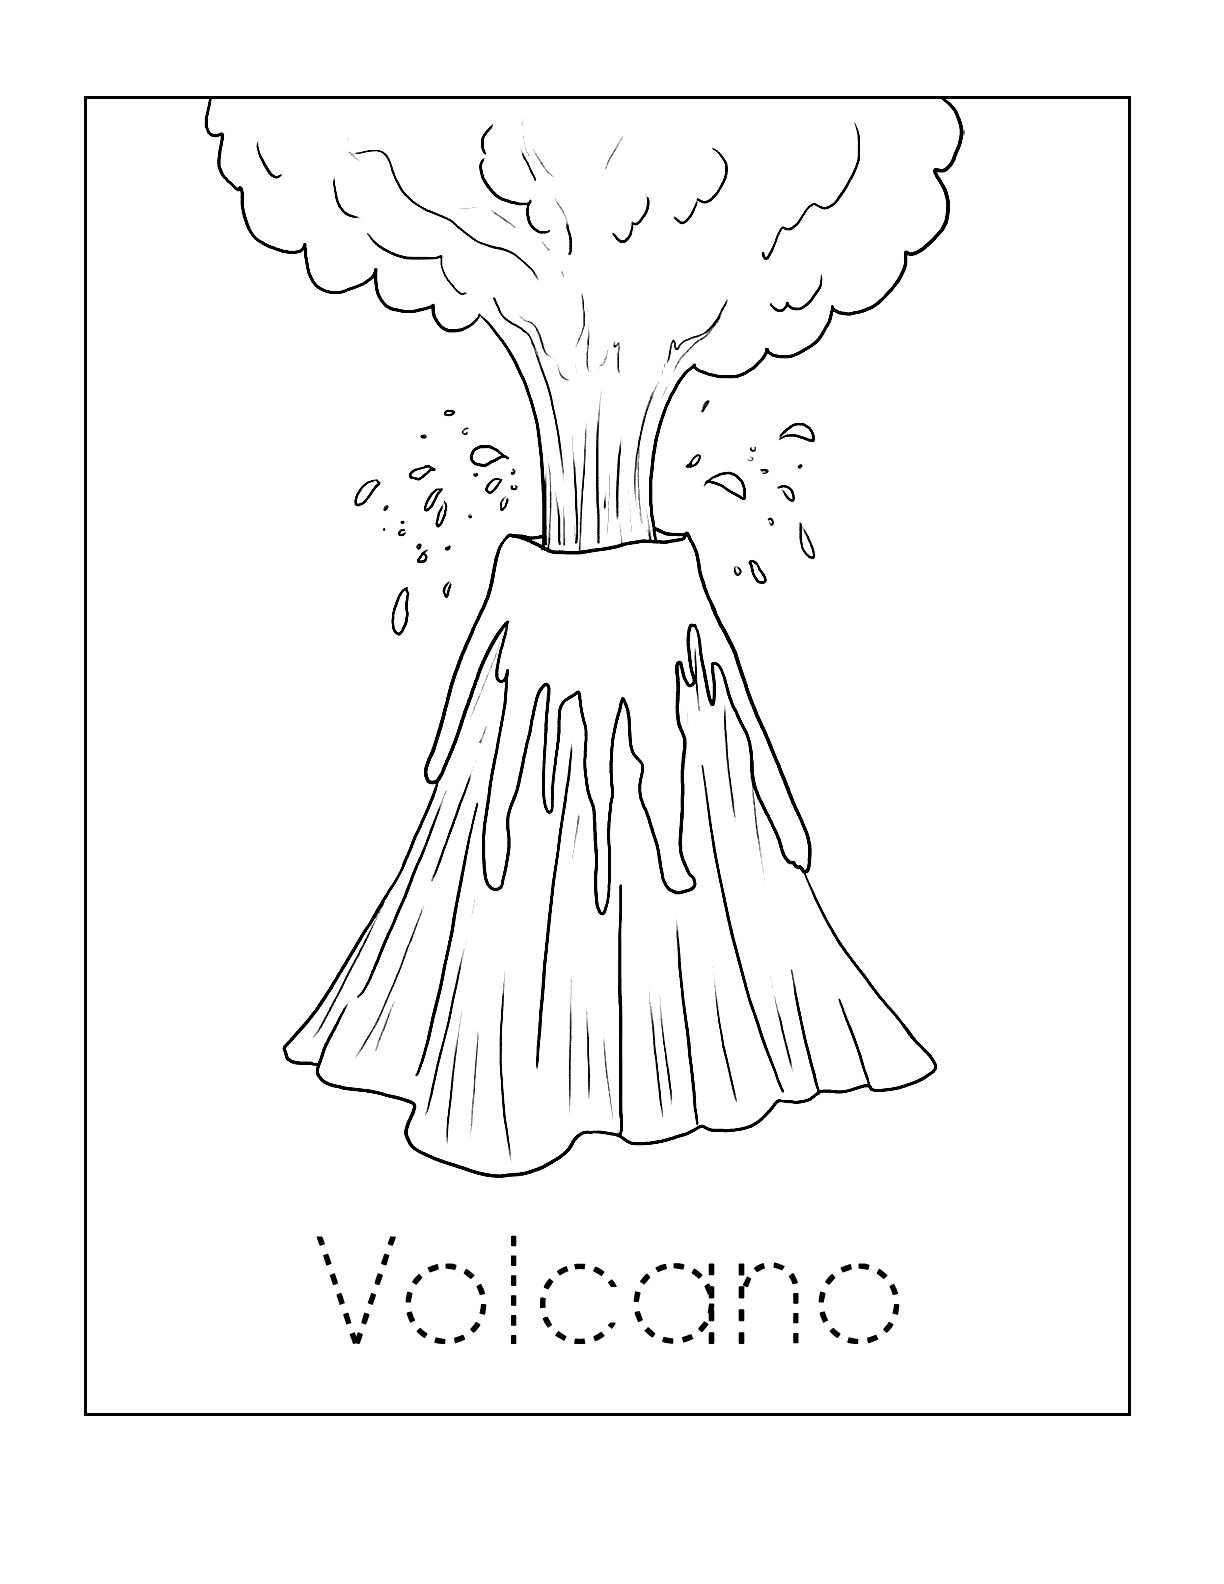 Volcano Traceable Coloring Sheet